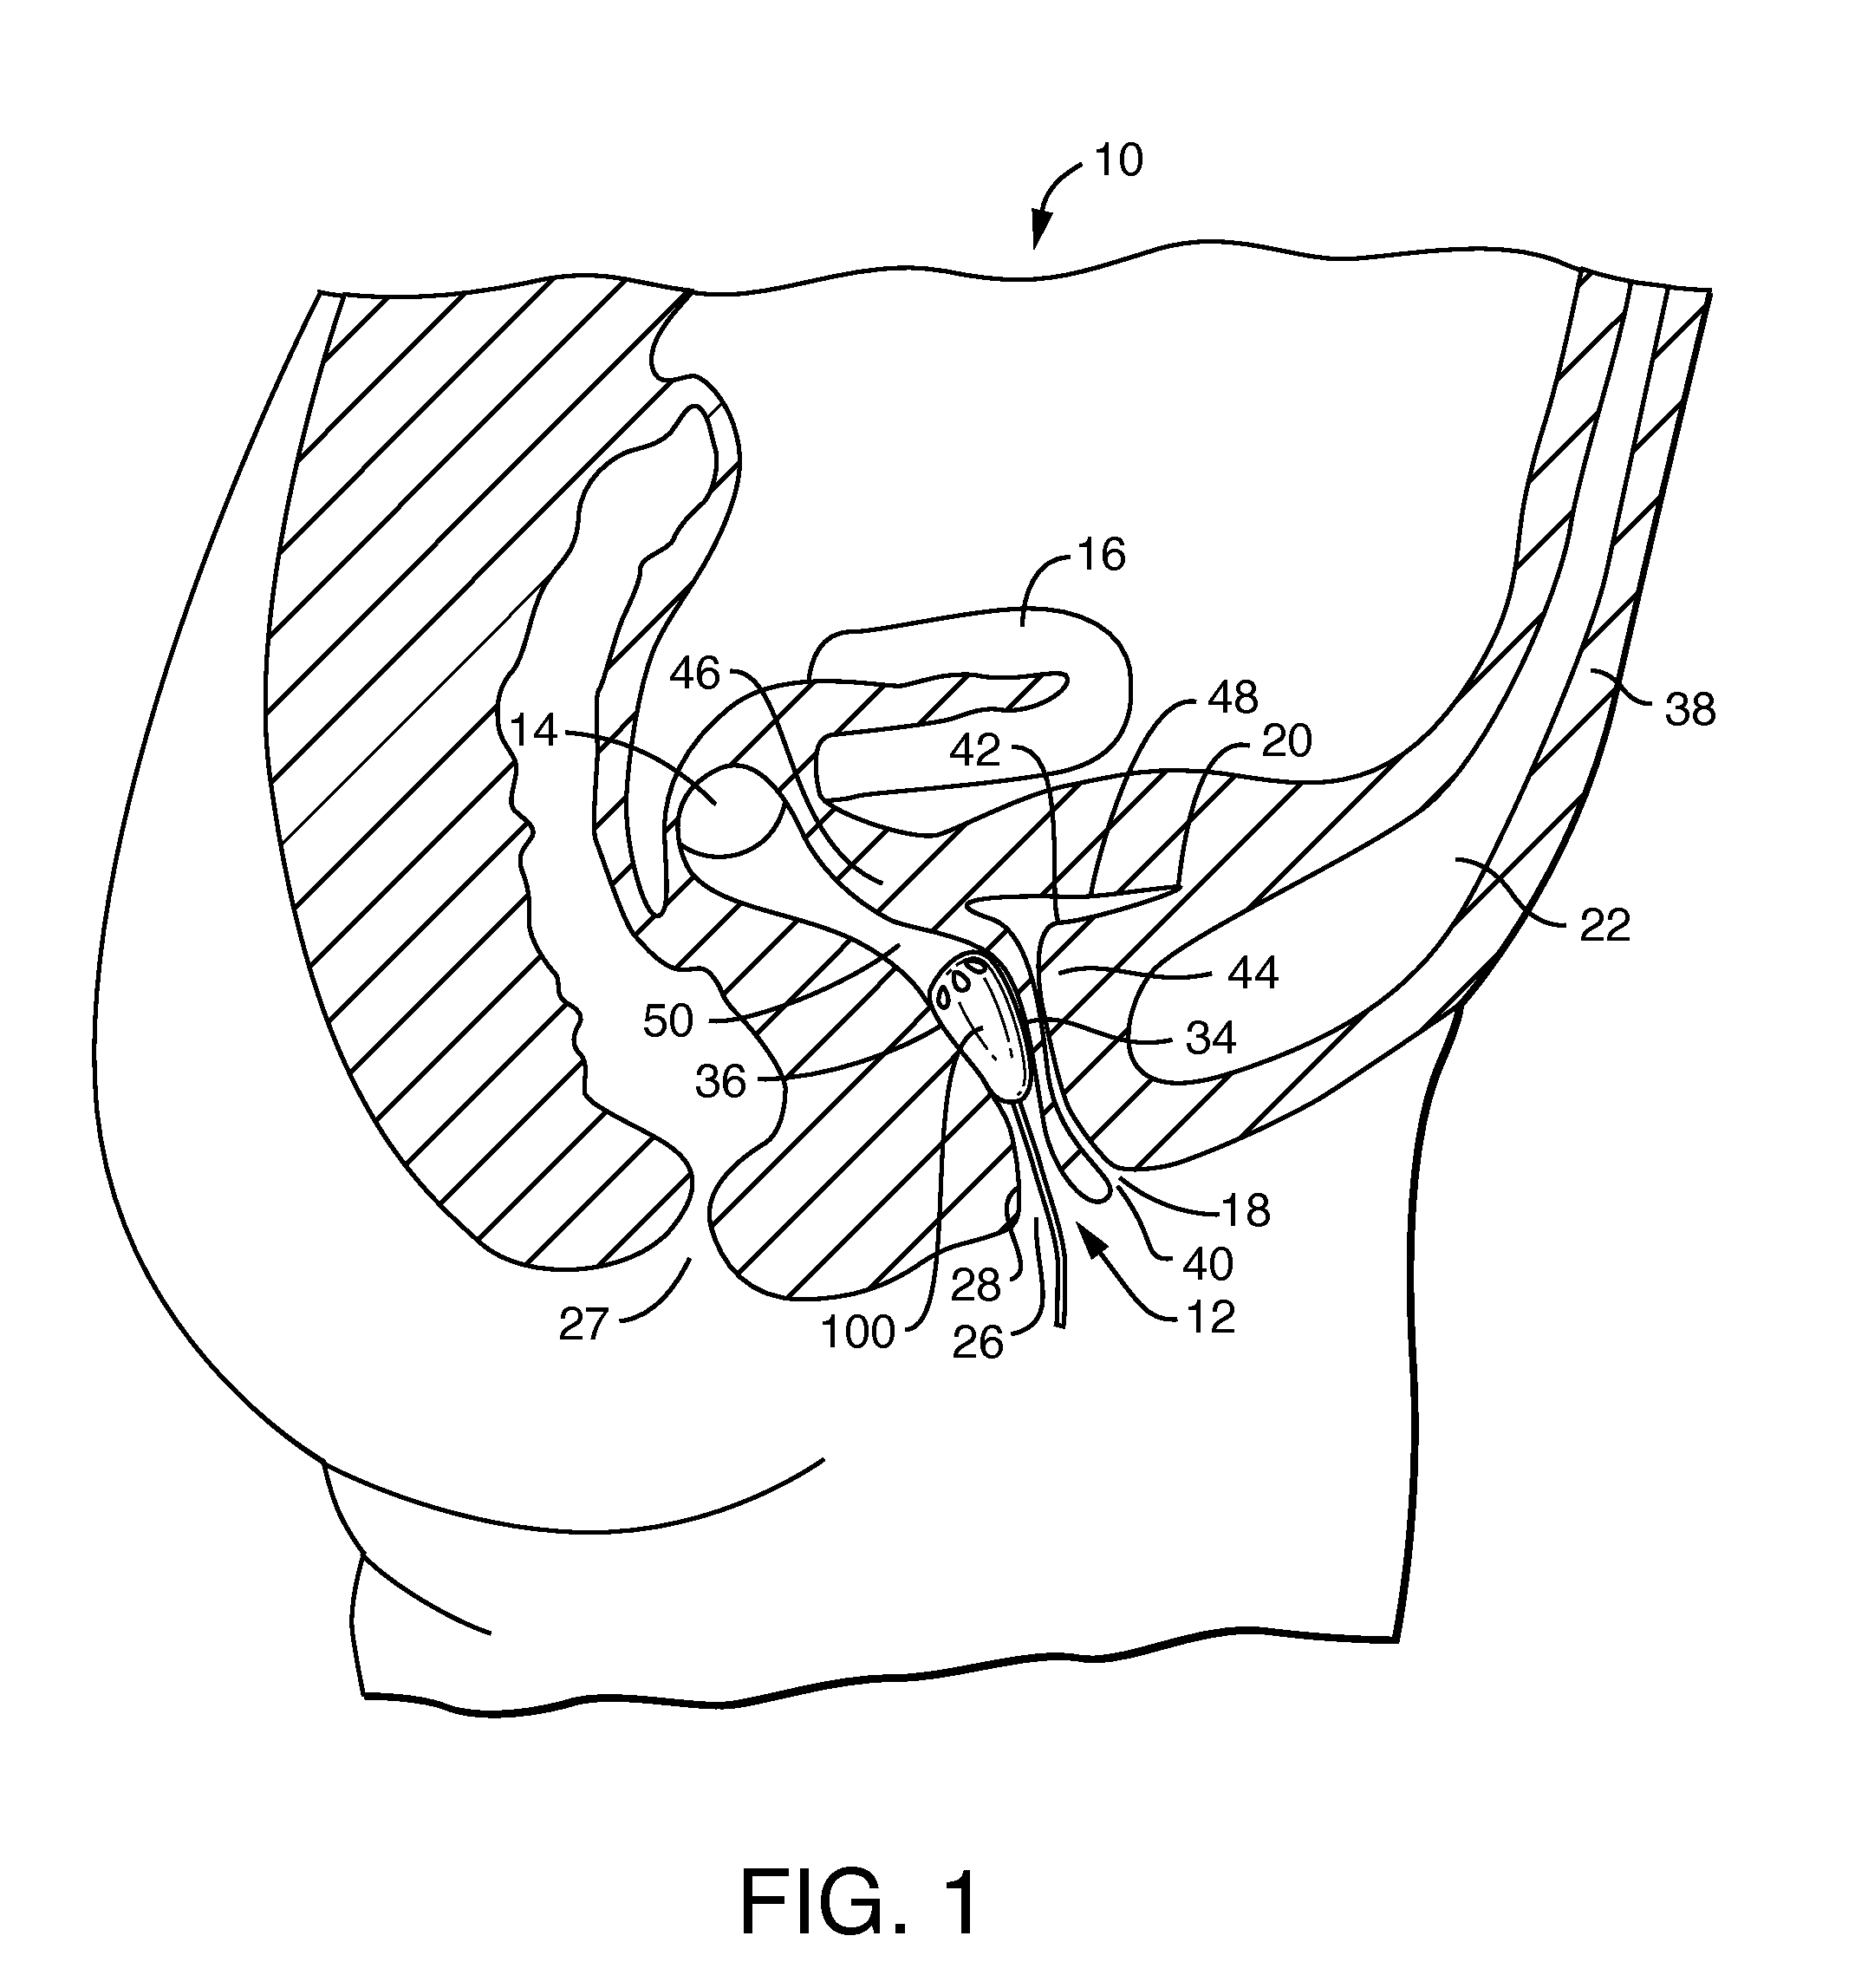 Vaginal Insert Device Having a Support Portion with Plurality of Foldable Areas